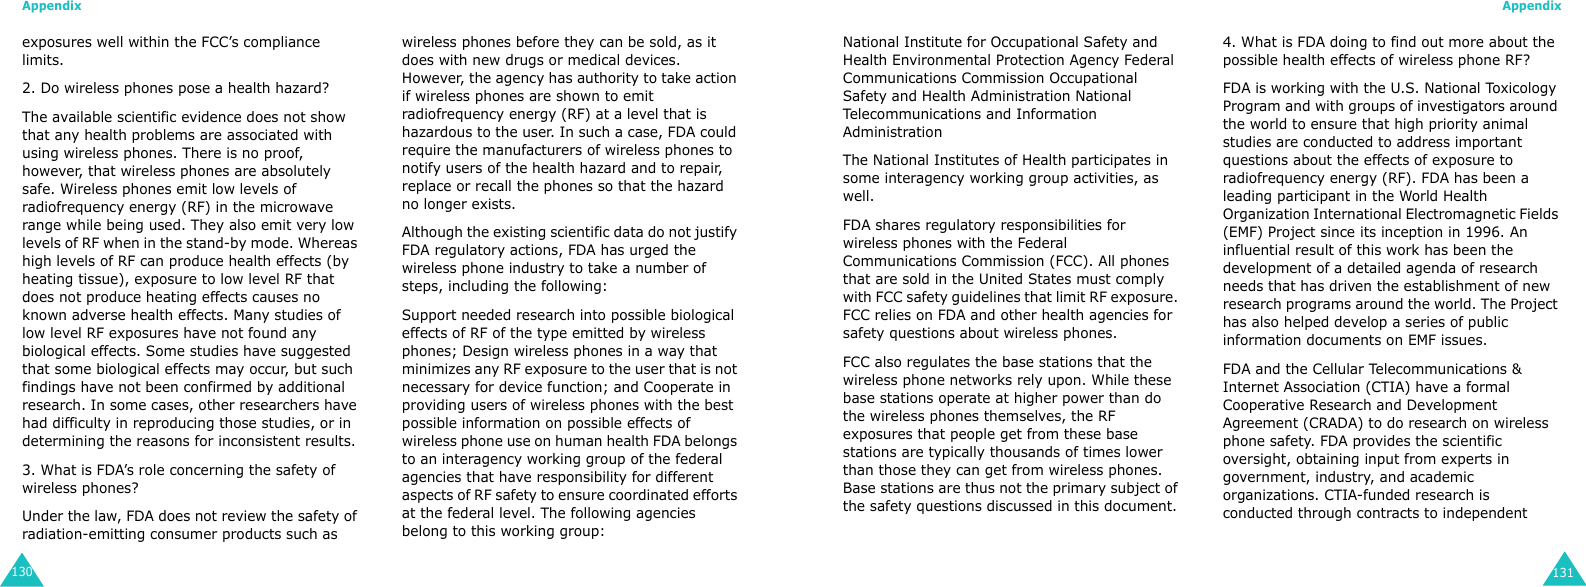 Appendix130exposures well within the FCC’s compliance limits.2. Do wireless phones pose a health hazard?The available scientific evidence does not show that any health problems are associated with using wireless phones. There is no proof, however, that wireless phones are absolutely safe. Wireless phones emit low levels of radiofrequency energy (RF) in the microwave range while being used. They also emit very low levels of RF when in the stand-by mode. Whereas high levels of RF can produce health effects (by heating tissue), exposure to low level RF that does not produce heating effects causes no known adverse health effects. Many studies of low level RF exposures have not found any biological effects. Some studies have suggested that some biological effects may occur, but such findings have not been confirmed by additional research. In some cases, other researchers have had difficulty in reproducing those studies, or in determining the reasons for inconsistent results.3. What is FDA’s role concerning the safety of wireless phones?Under the law, FDA does not review the safety of radiation-emitting consumer products such as wireless phones before they can be sold, as it does with new drugs or medical devices. However, the agency has authority to take action if wireless phones are shown to emit radiofrequency energy (RF) at a level that is hazardous to the user. In such a case, FDA could require the manufacturers of wireless phones to notify users of the health hazard and to repair, replace or recall the phones so that the hazard no longer exists.Although the existing scientific data do not justify FDA regulatory actions, FDA has urged the wireless phone industry to take a number of steps, including the following:Support needed research into possible biological effects of RF of the type emitted by wireless phones; Design wireless phones in a way that minimizes any RF exposure to the user that is not necessary for device function; and Cooperate in providing users of wireless phones with the best possible information on possible effects of wireless phone use on human health FDA belongs to an interagency working group of the federal agencies that have responsibility for different aspects of RF safety to ensure coordinated efforts at the federal level. The following agencies belong to this working group:Appendix131National Institute for Occupational Safety and Health Environmental Protection Agency Federal Communications Commission Occupational Safety and Health Administration National Telecommunications and Information Administration The National Institutes of Health participates in some interagency working group activities, as well. FDA shares regulatory responsibilities for wireless phones with the Federal Communications Commission (FCC). All phones that are sold in the United States must comply with FCC safety guidelines that limit RF exposure. FCC relies on FDA and other health agencies for safety questions about wireless phones.FCC also regulates the base stations that the wireless phone networks rely upon. While these base stations operate at higher power than do the wireless phones themselves, the RF exposures that people get from these base stations are typically thousands of times lower than those they can get from wireless phones. Base stations are thus not the primary subject of the safety questions discussed in this document.4. What is FDA doing to find out more about the possible health effects of wireless phone RF?FDA is working with the U.S. National Toxicology Program and with groups of investigators around the world to ensure that high priority animal studies are conducted to address important questions about the effects of exposure to radiofrequency energy (RF). FDA has been a leading participant in the World Health Organization International Electromagnetic Fields (EMF) Project since its inception in 1996. An influential result of this work has been the development of a detailed agenda of research needs that has driven the establishment of new research programs around the world. The Project has also helped develop a series of public information documents on EMF issues. FDA and the Cellular Telecommunications &amp; Internet Association (CTIA) have a formal Cooperative Research and Development Agreement (CRADA) to do research on wireless phone safety. FDA provides the scientific oversight, obtaining input from experts in government, industry, and academic organizations. CTIA-funded research is conducted through contracts to independent 